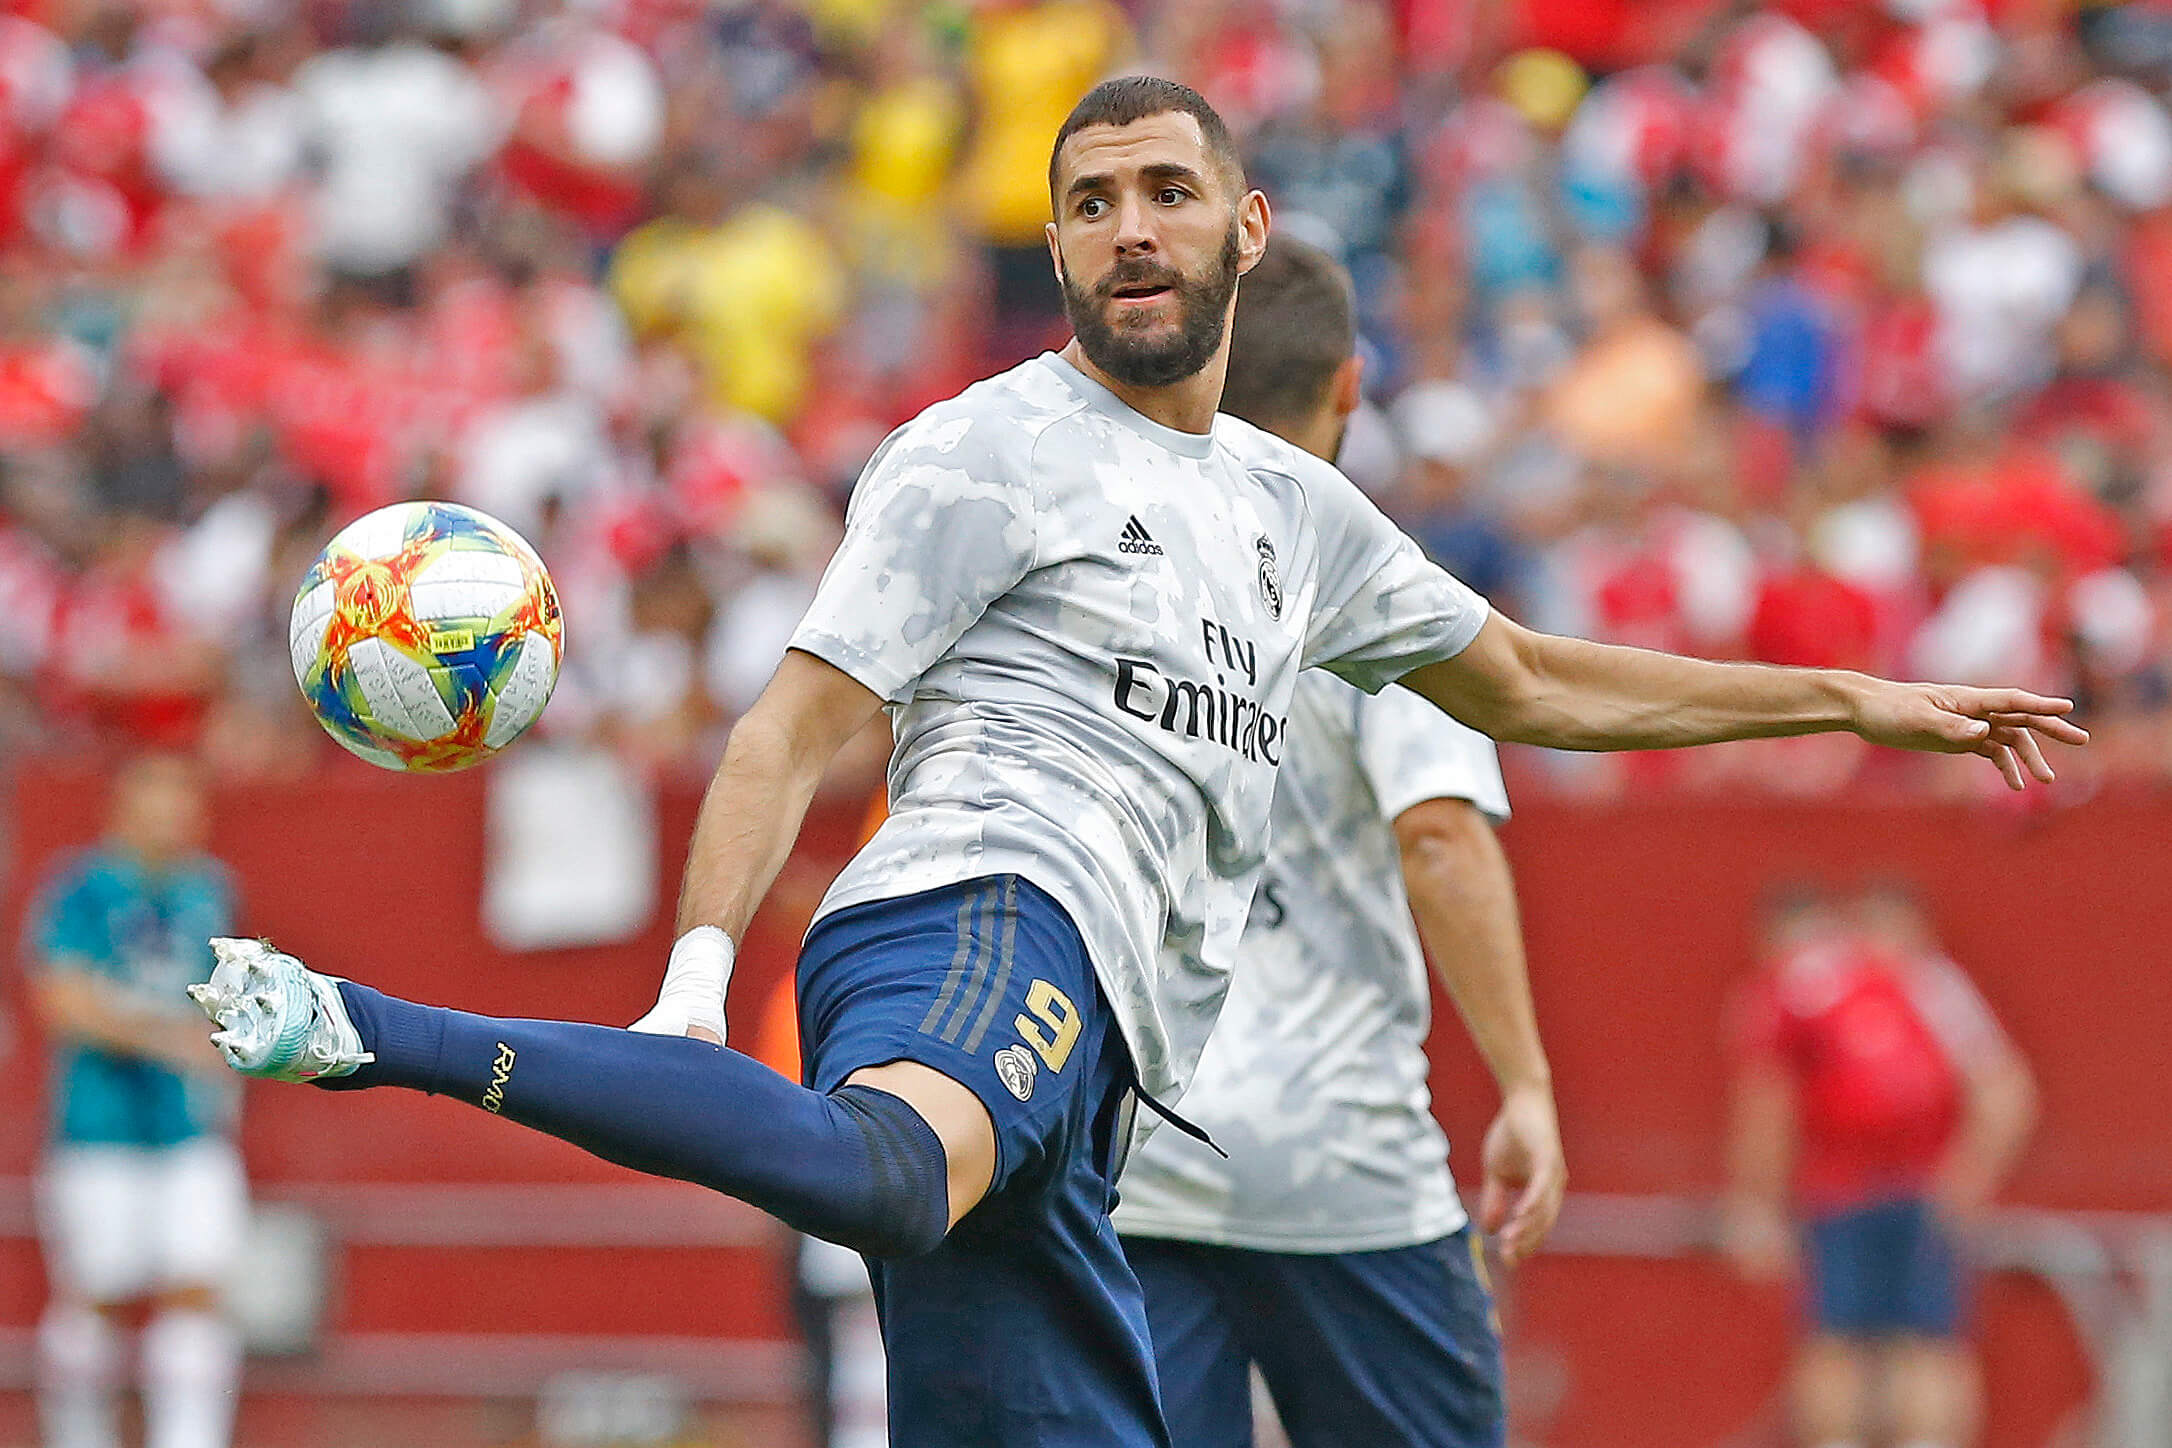 How To Bet - Liverpool vs Real Madrid Champions League Final Prop Picks: Benzema Steals the Show in Saint-Denis